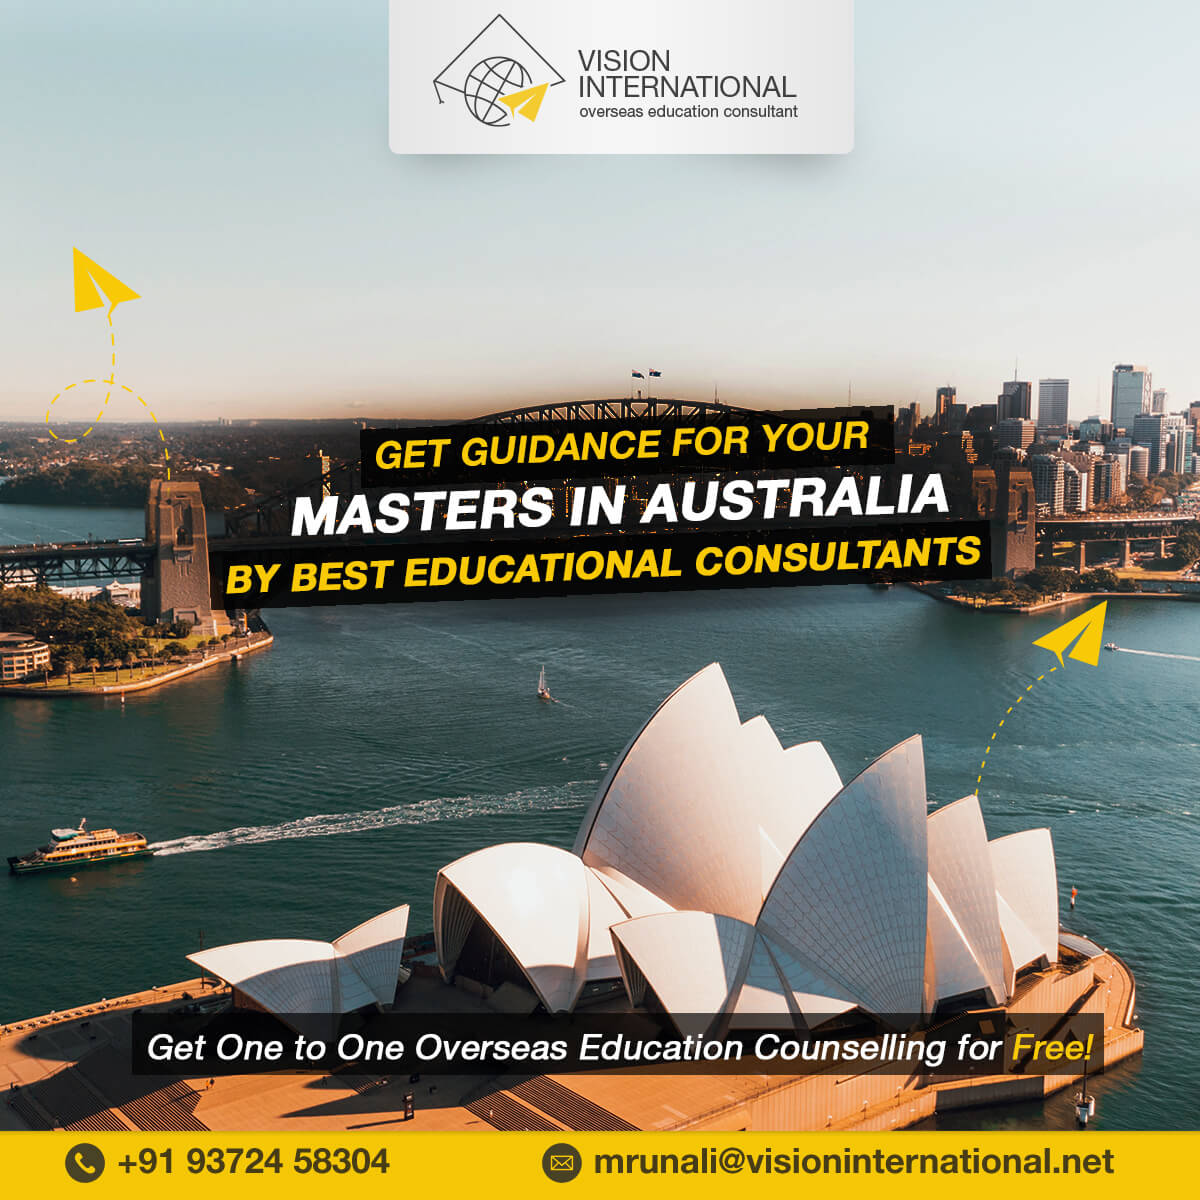 Get Guidance for your Masters in Australia from the Best Educational Consultants